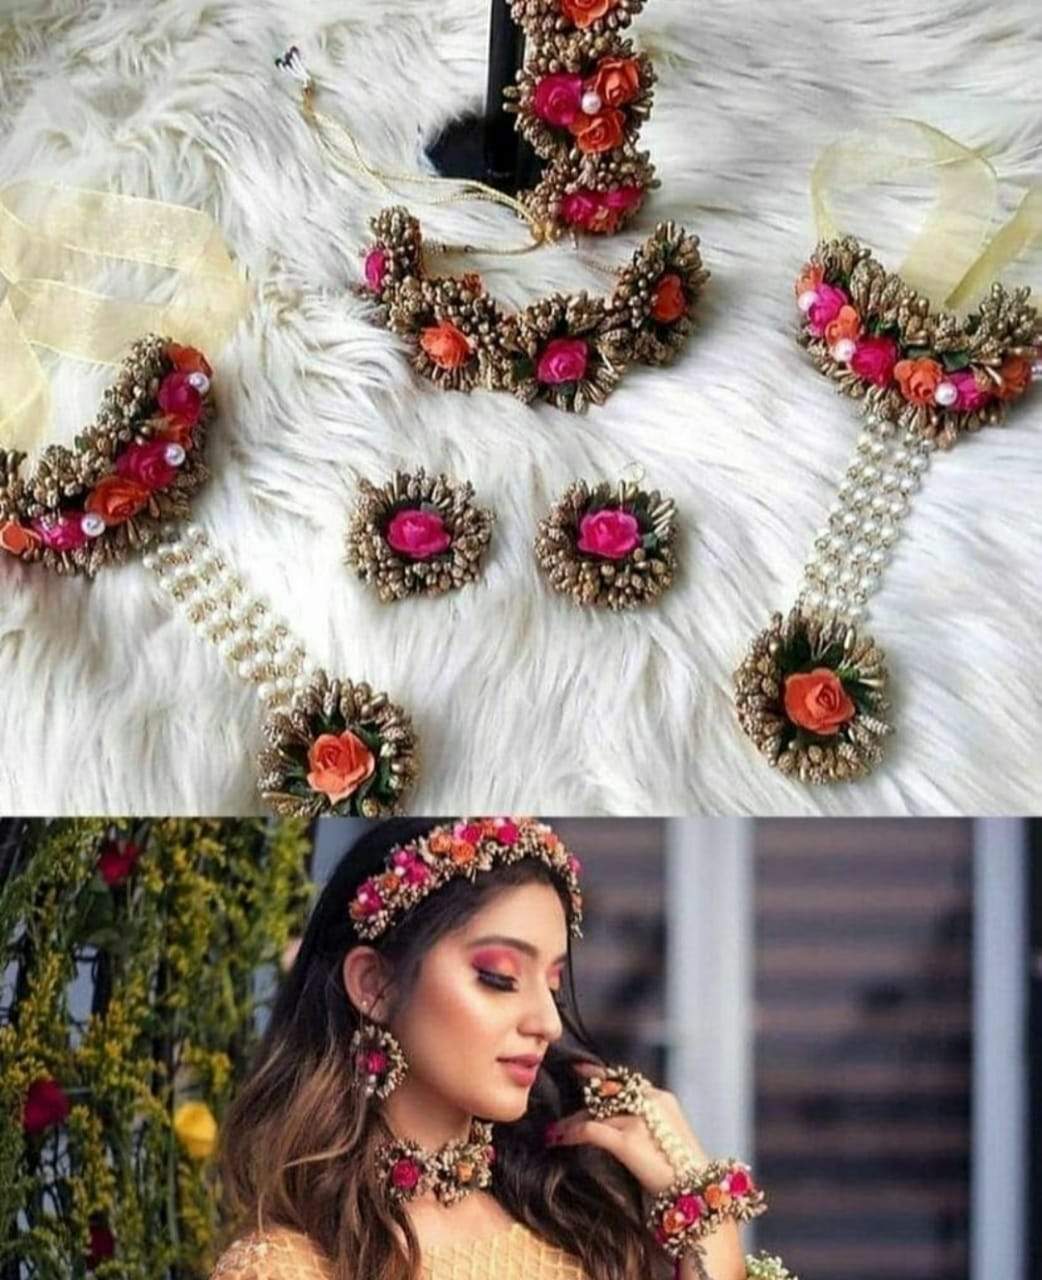 Lamansh Necklace, Tiara , Earrings , Bracelets Attached with ring 1 Necklace, 1 Hair accessory , 2 Earrings , 2 Bracelets attached with ring set / Orange- Pink -Gold LAMANSH® Flower Fabric Hand Jewellery Haldi Baby Shower Mehndi Godbharai Set For Women, Girls / Floral Jewellery Set